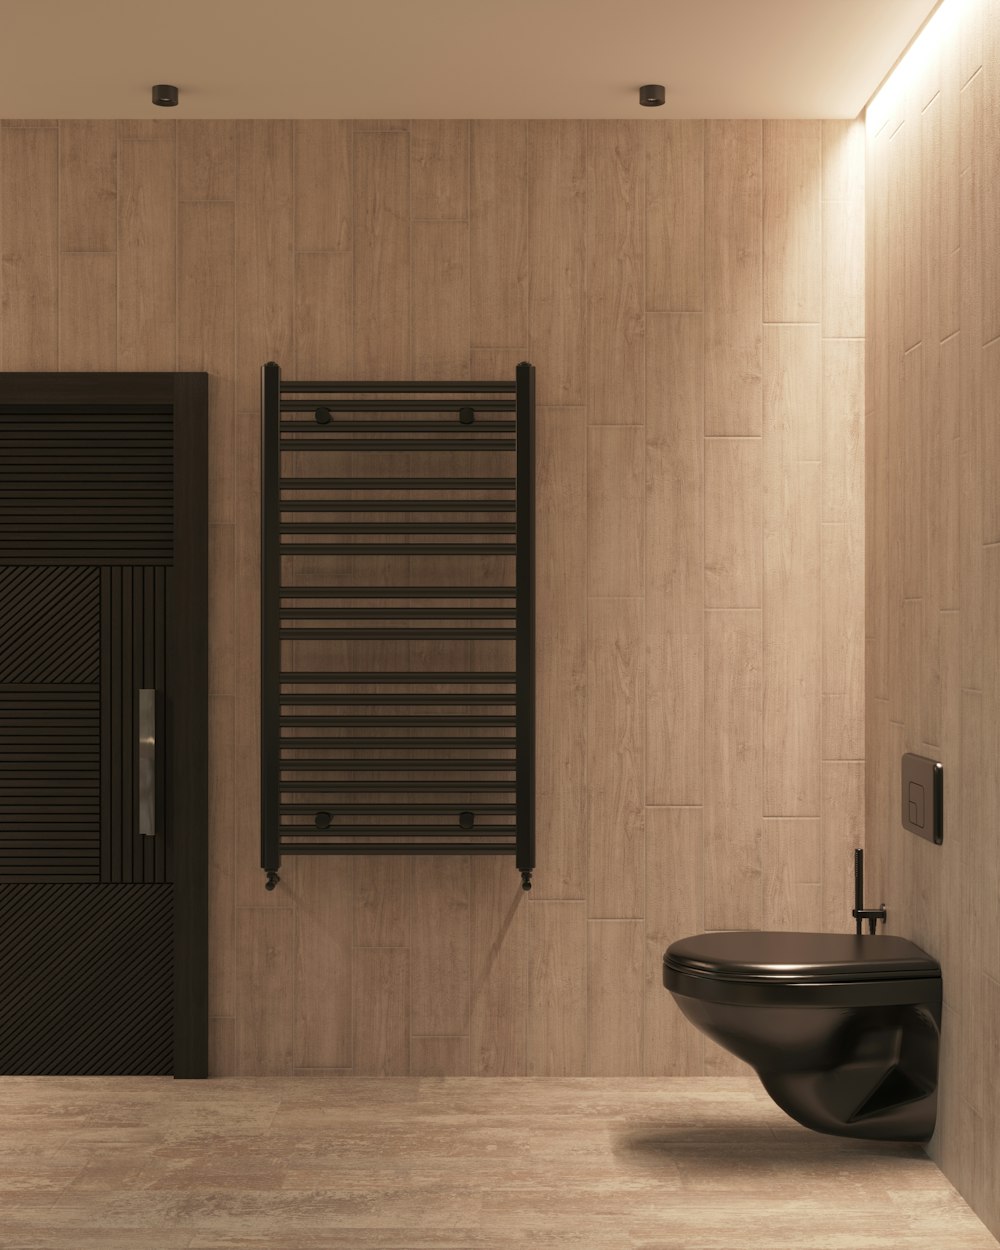 Woestijn computer nieuwigheid A bathroom with a toilet, sink and a radiator photo – Free Indoors Image on  Unsplash